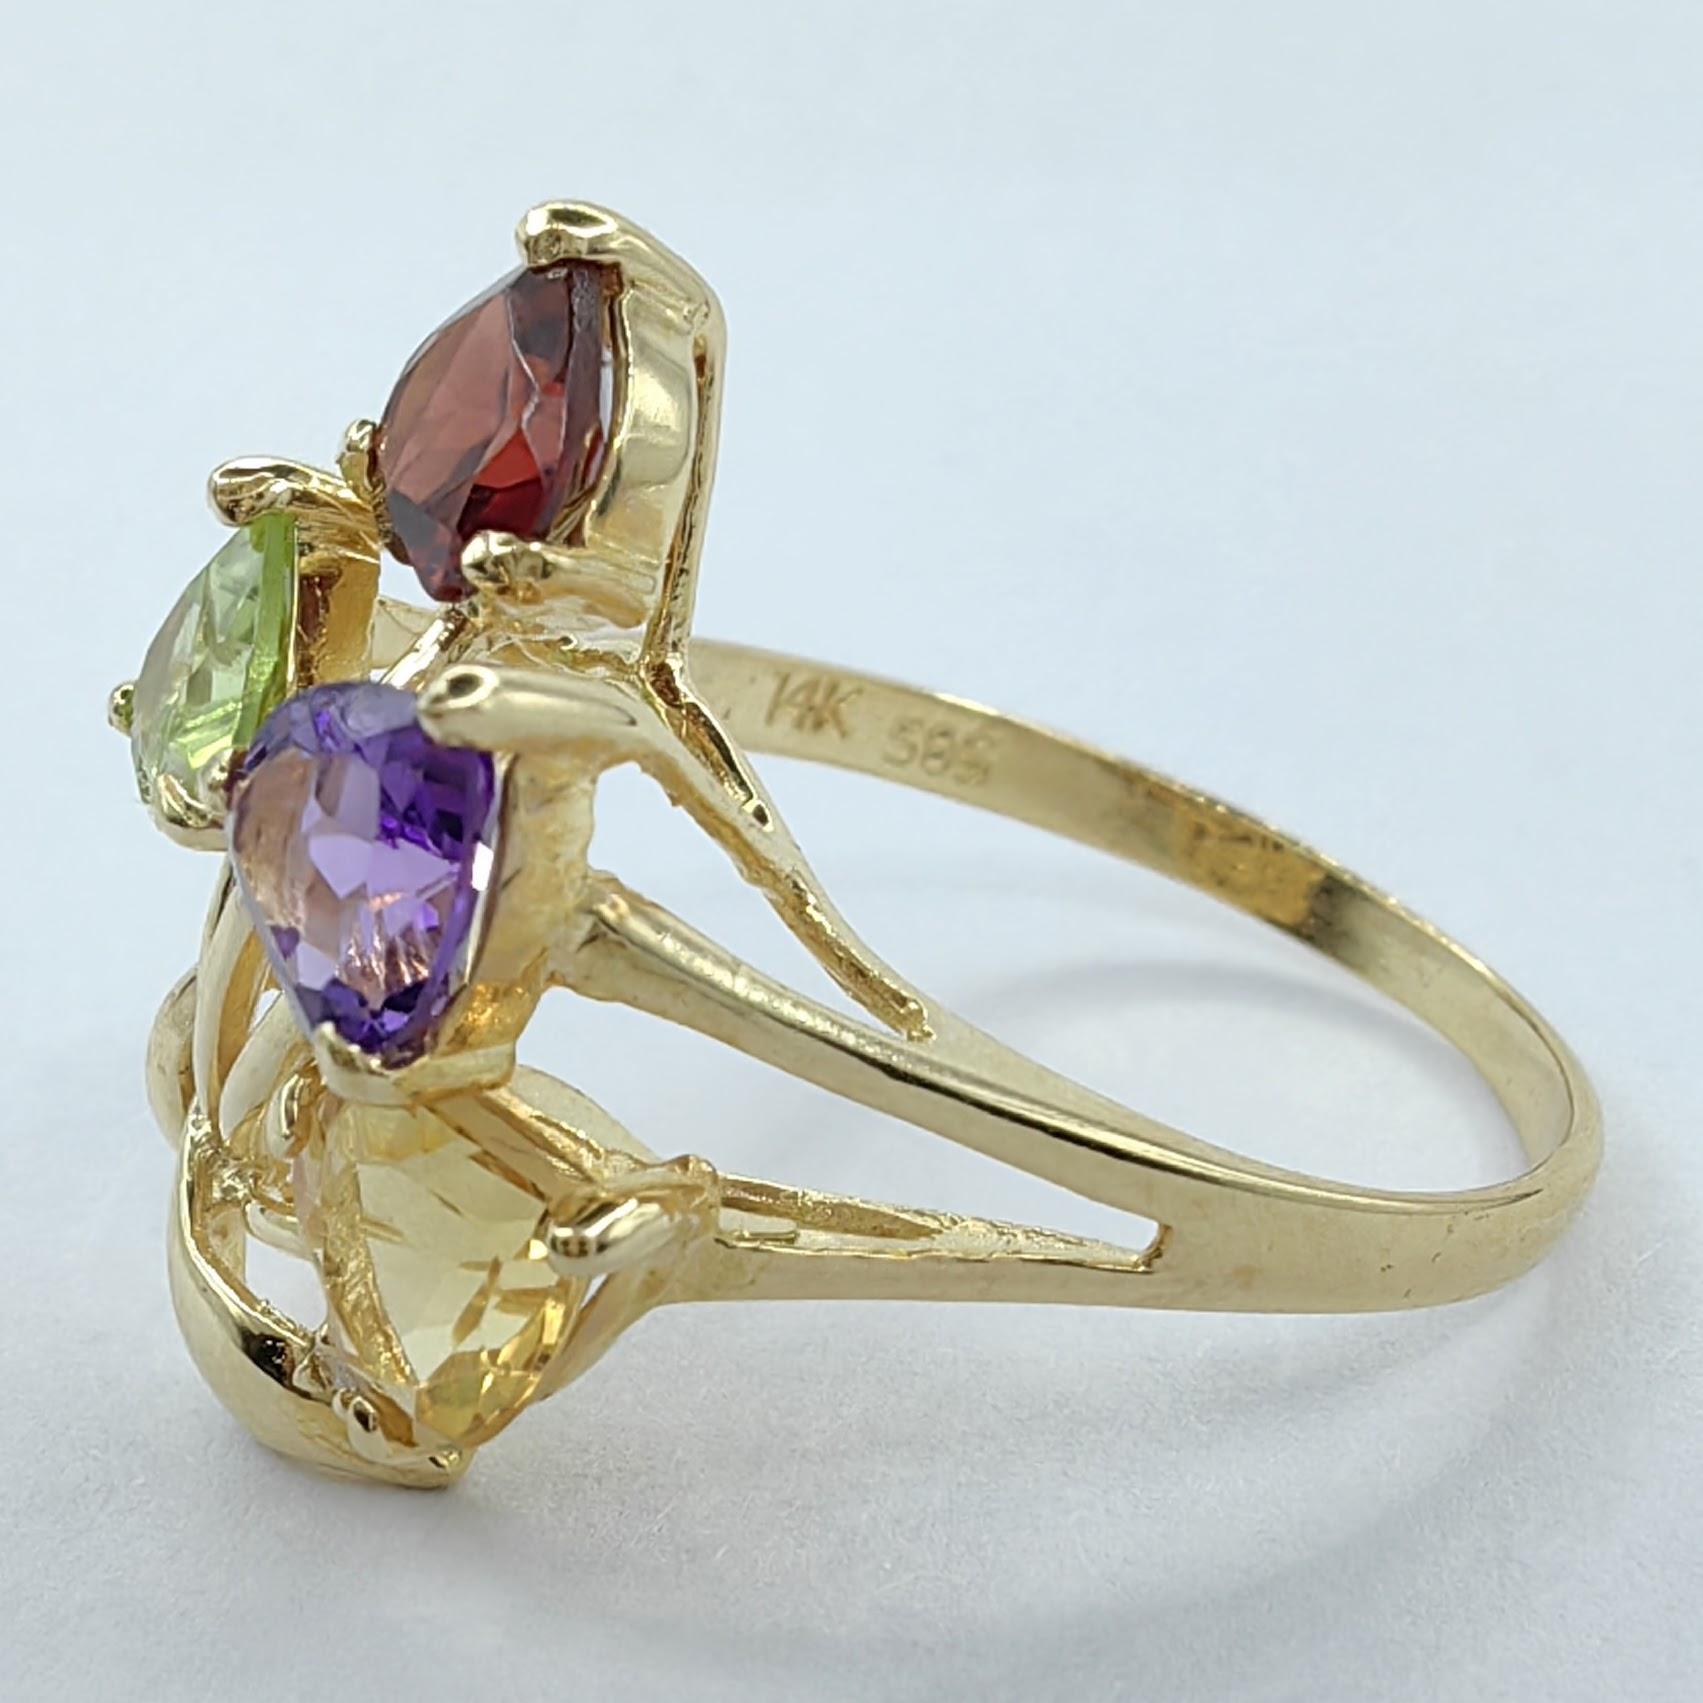 Contemporary Heart Shaped Amethyst, Citrine, Garnet, Peridot Flower Bouquet Ring in 14k Gold For Sale